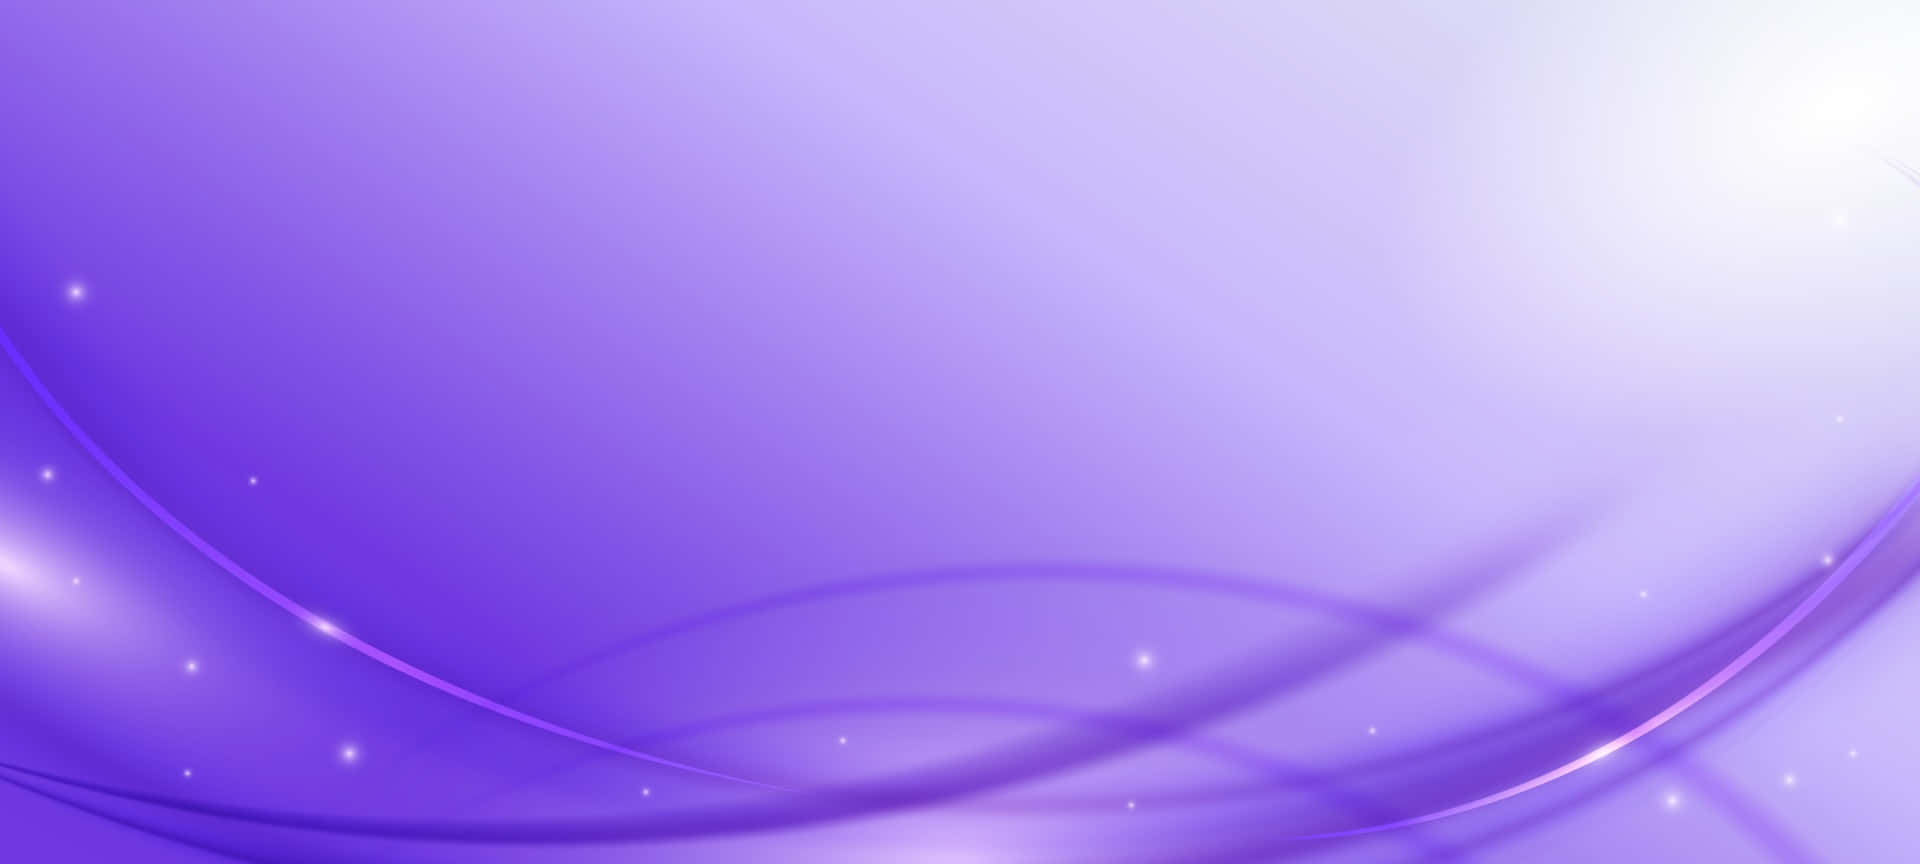 Creative and modern violet-inspired background